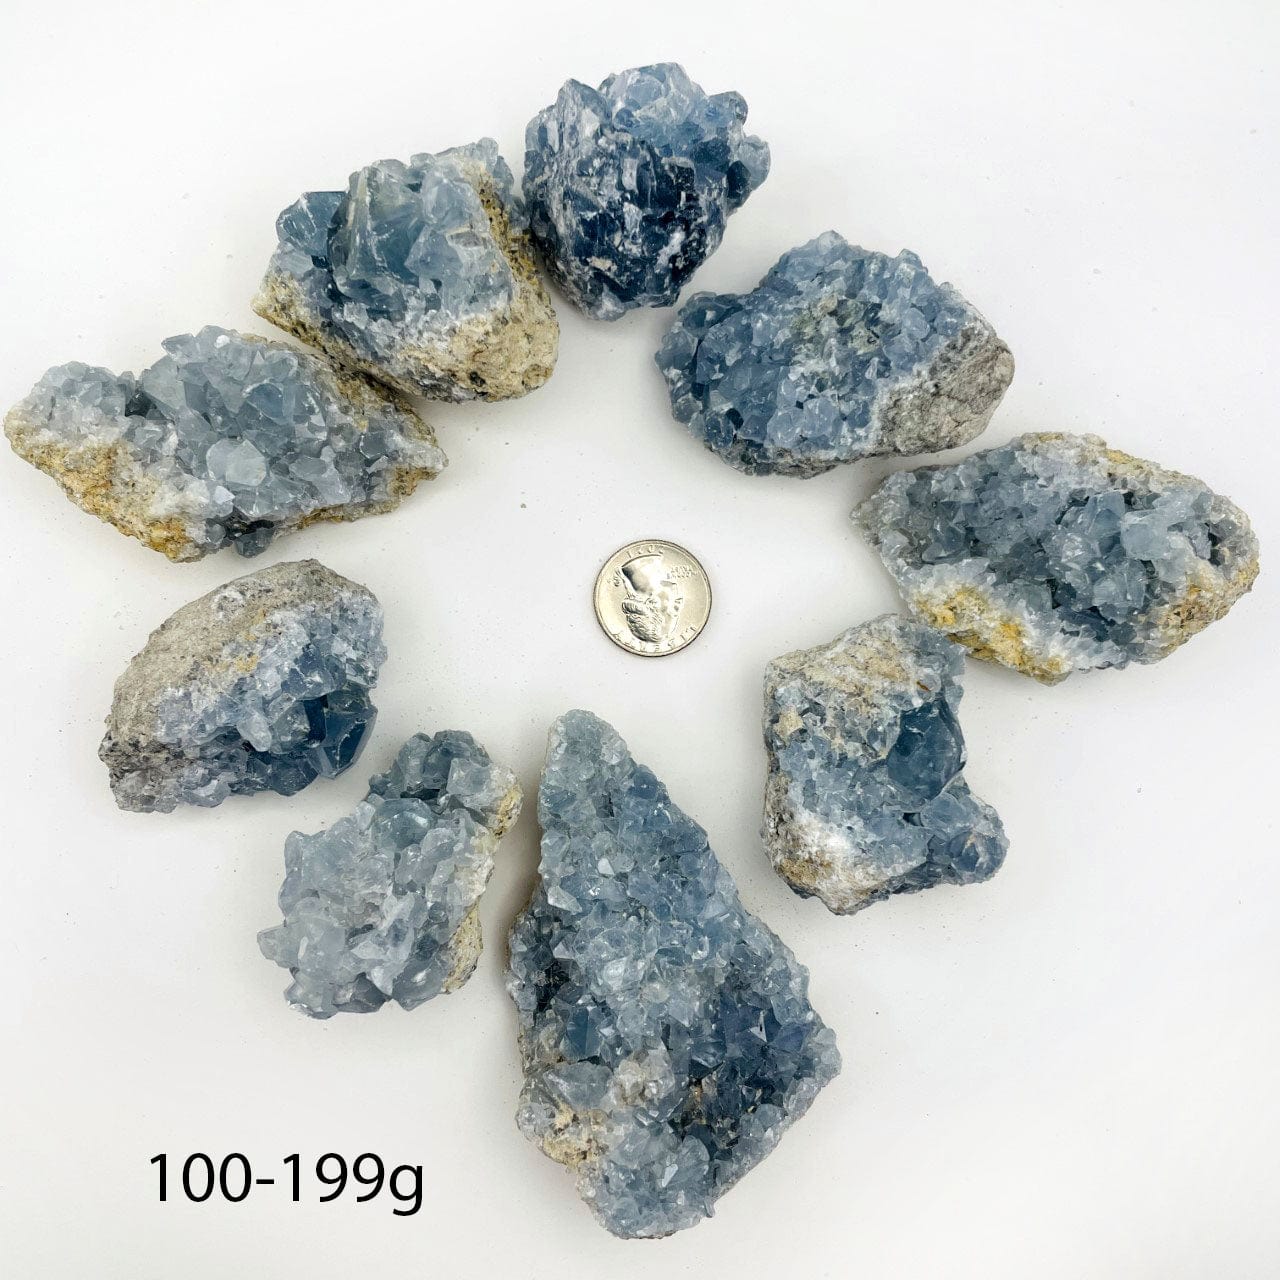 Celestite Crystals in size 100-199g next to a quarter for size reference